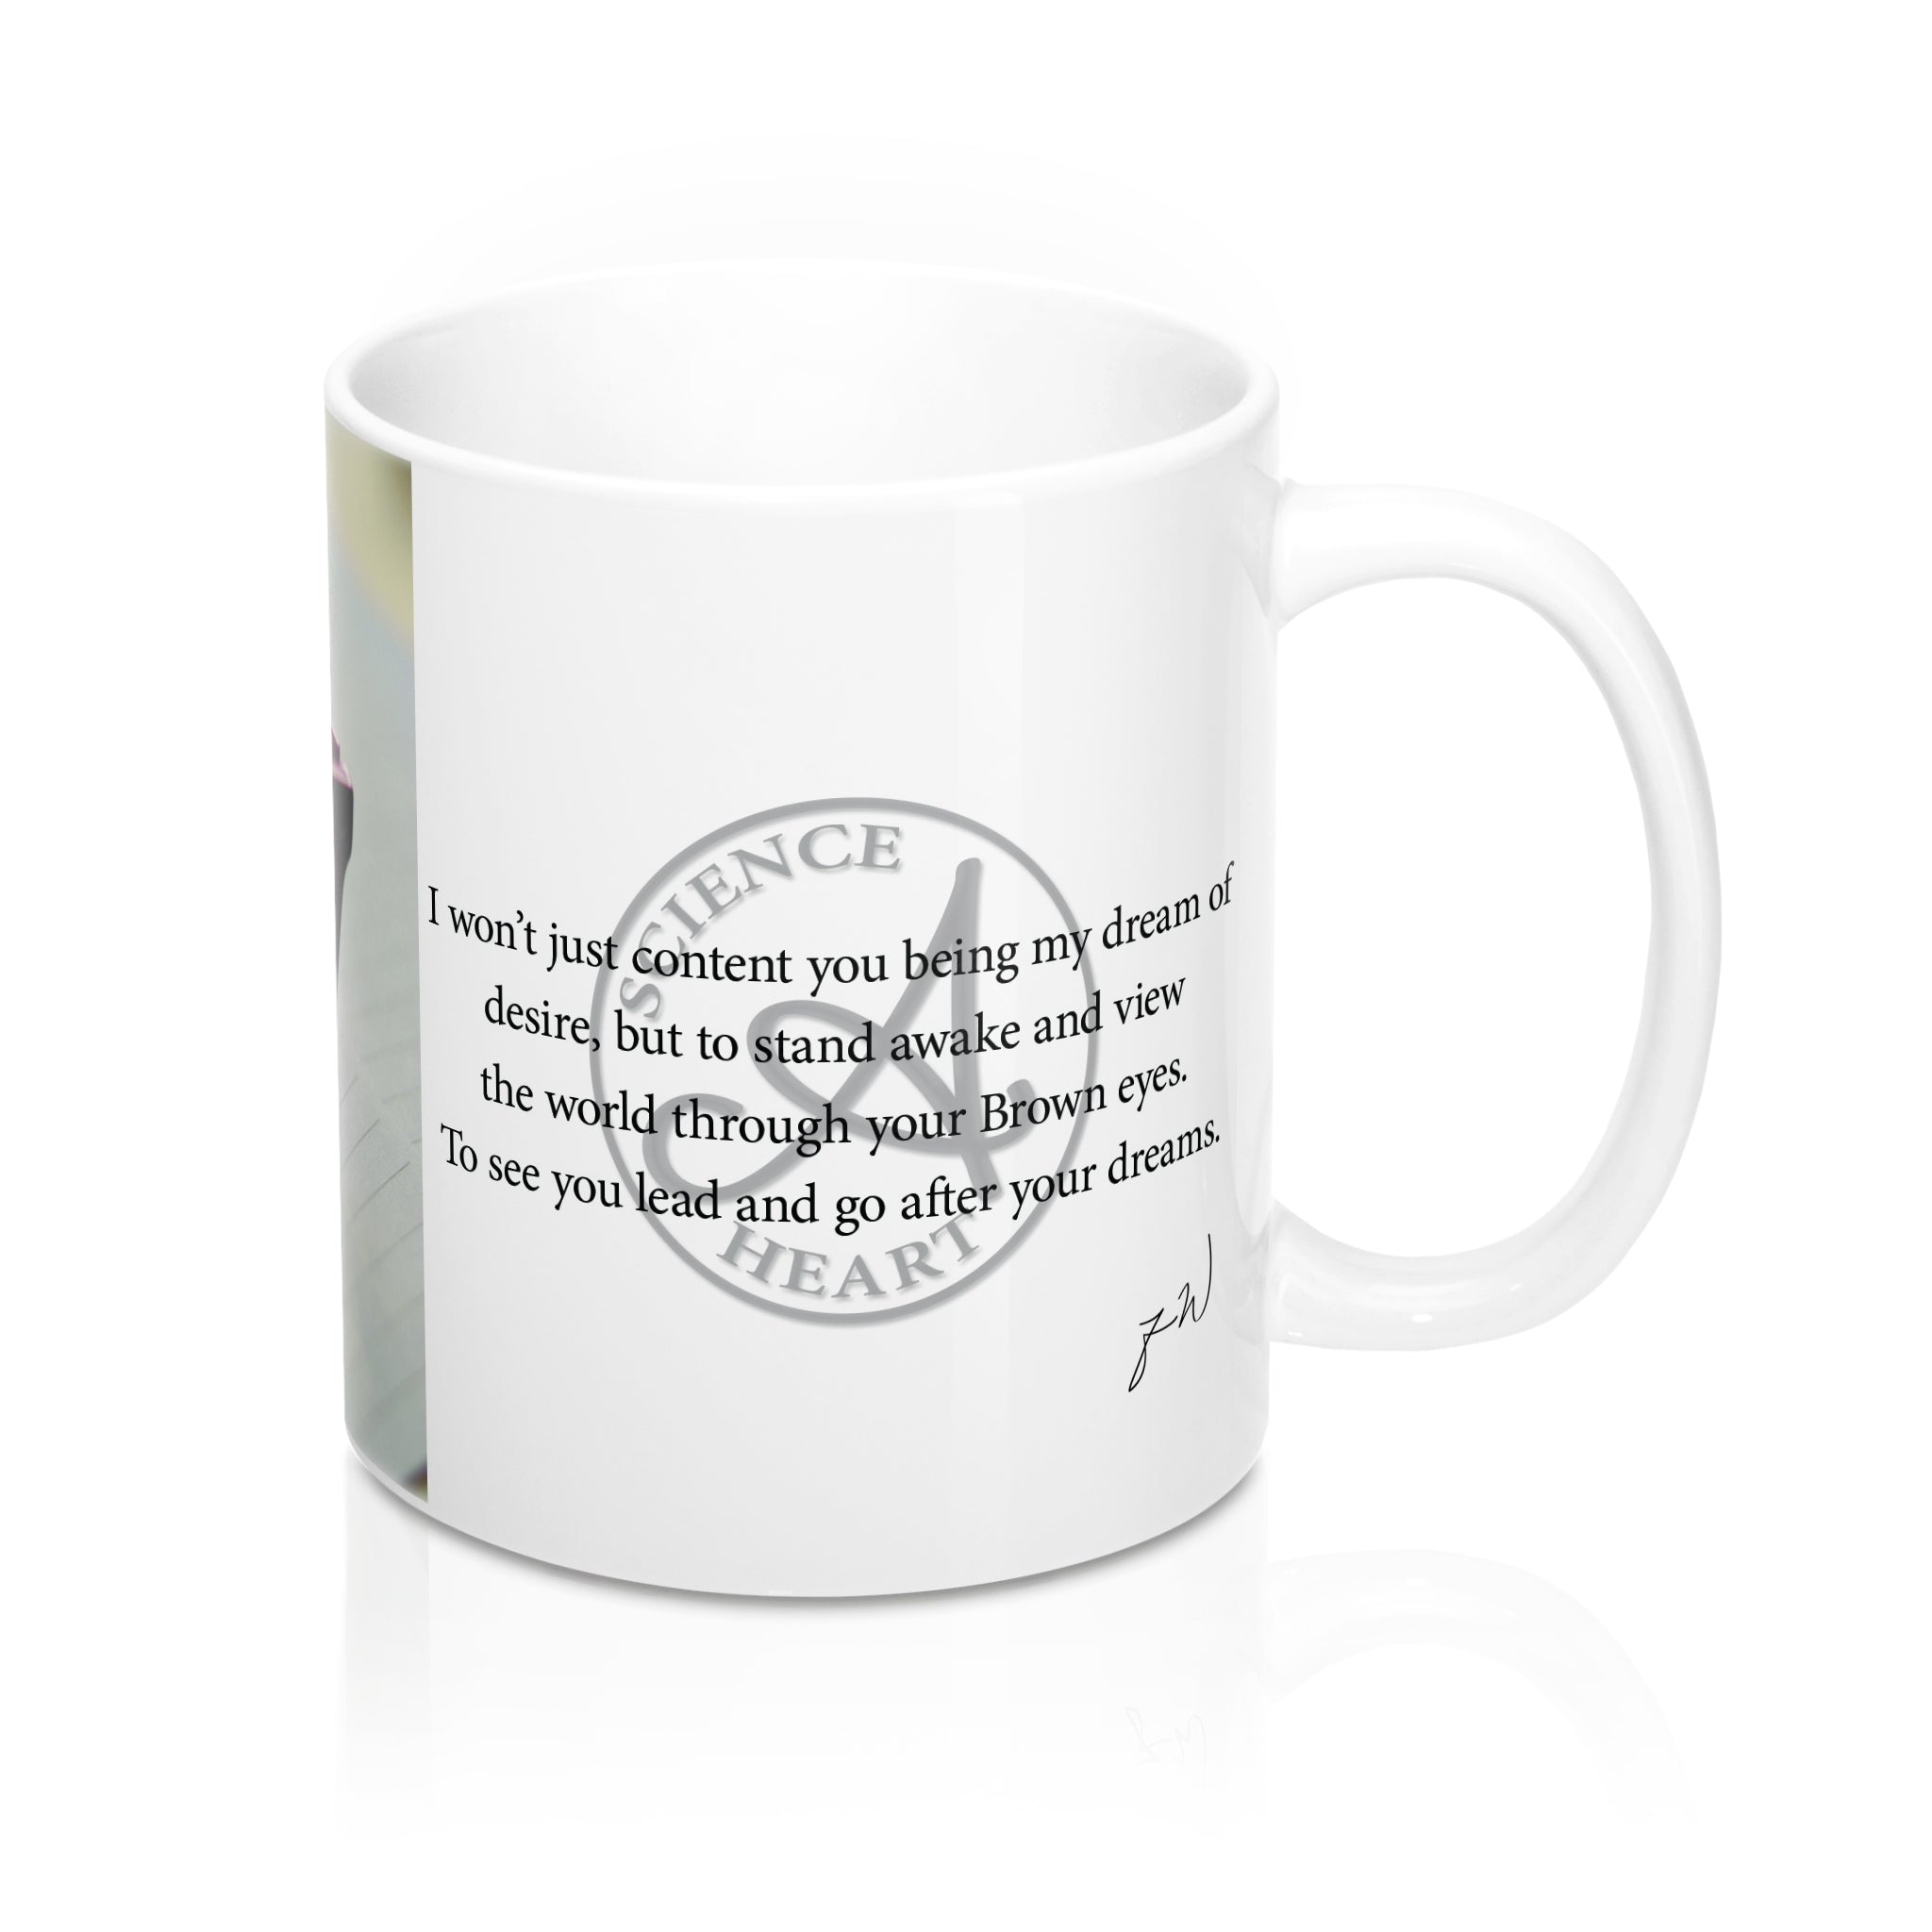 "I won’t just content you being my dream of desire" Mug